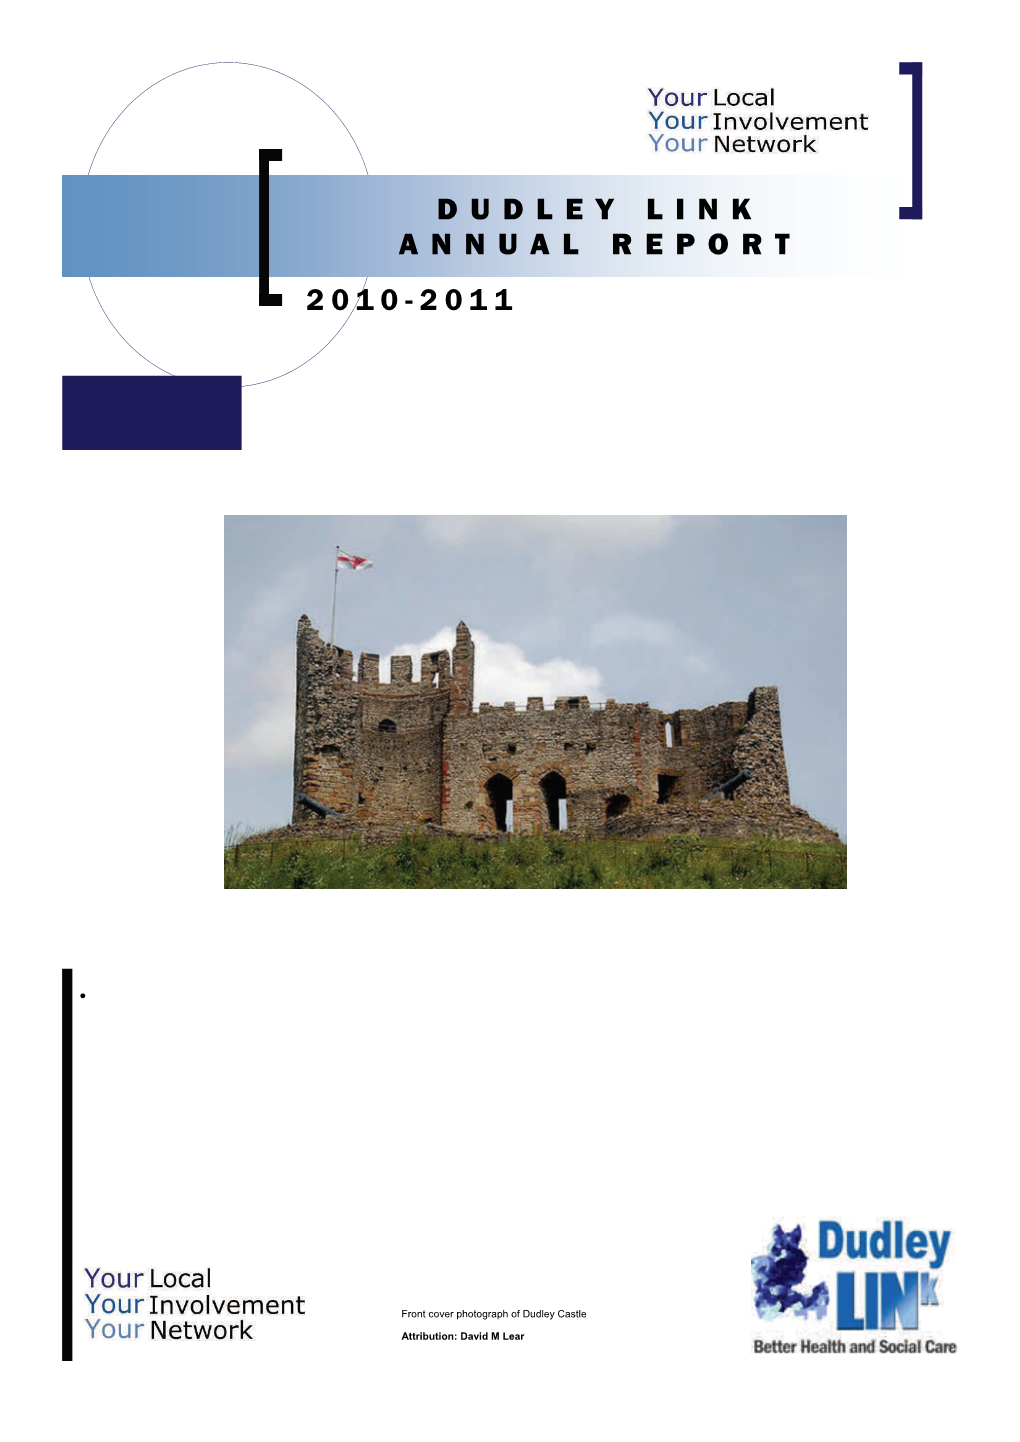 2010-2011 Dudley Link Annual Report